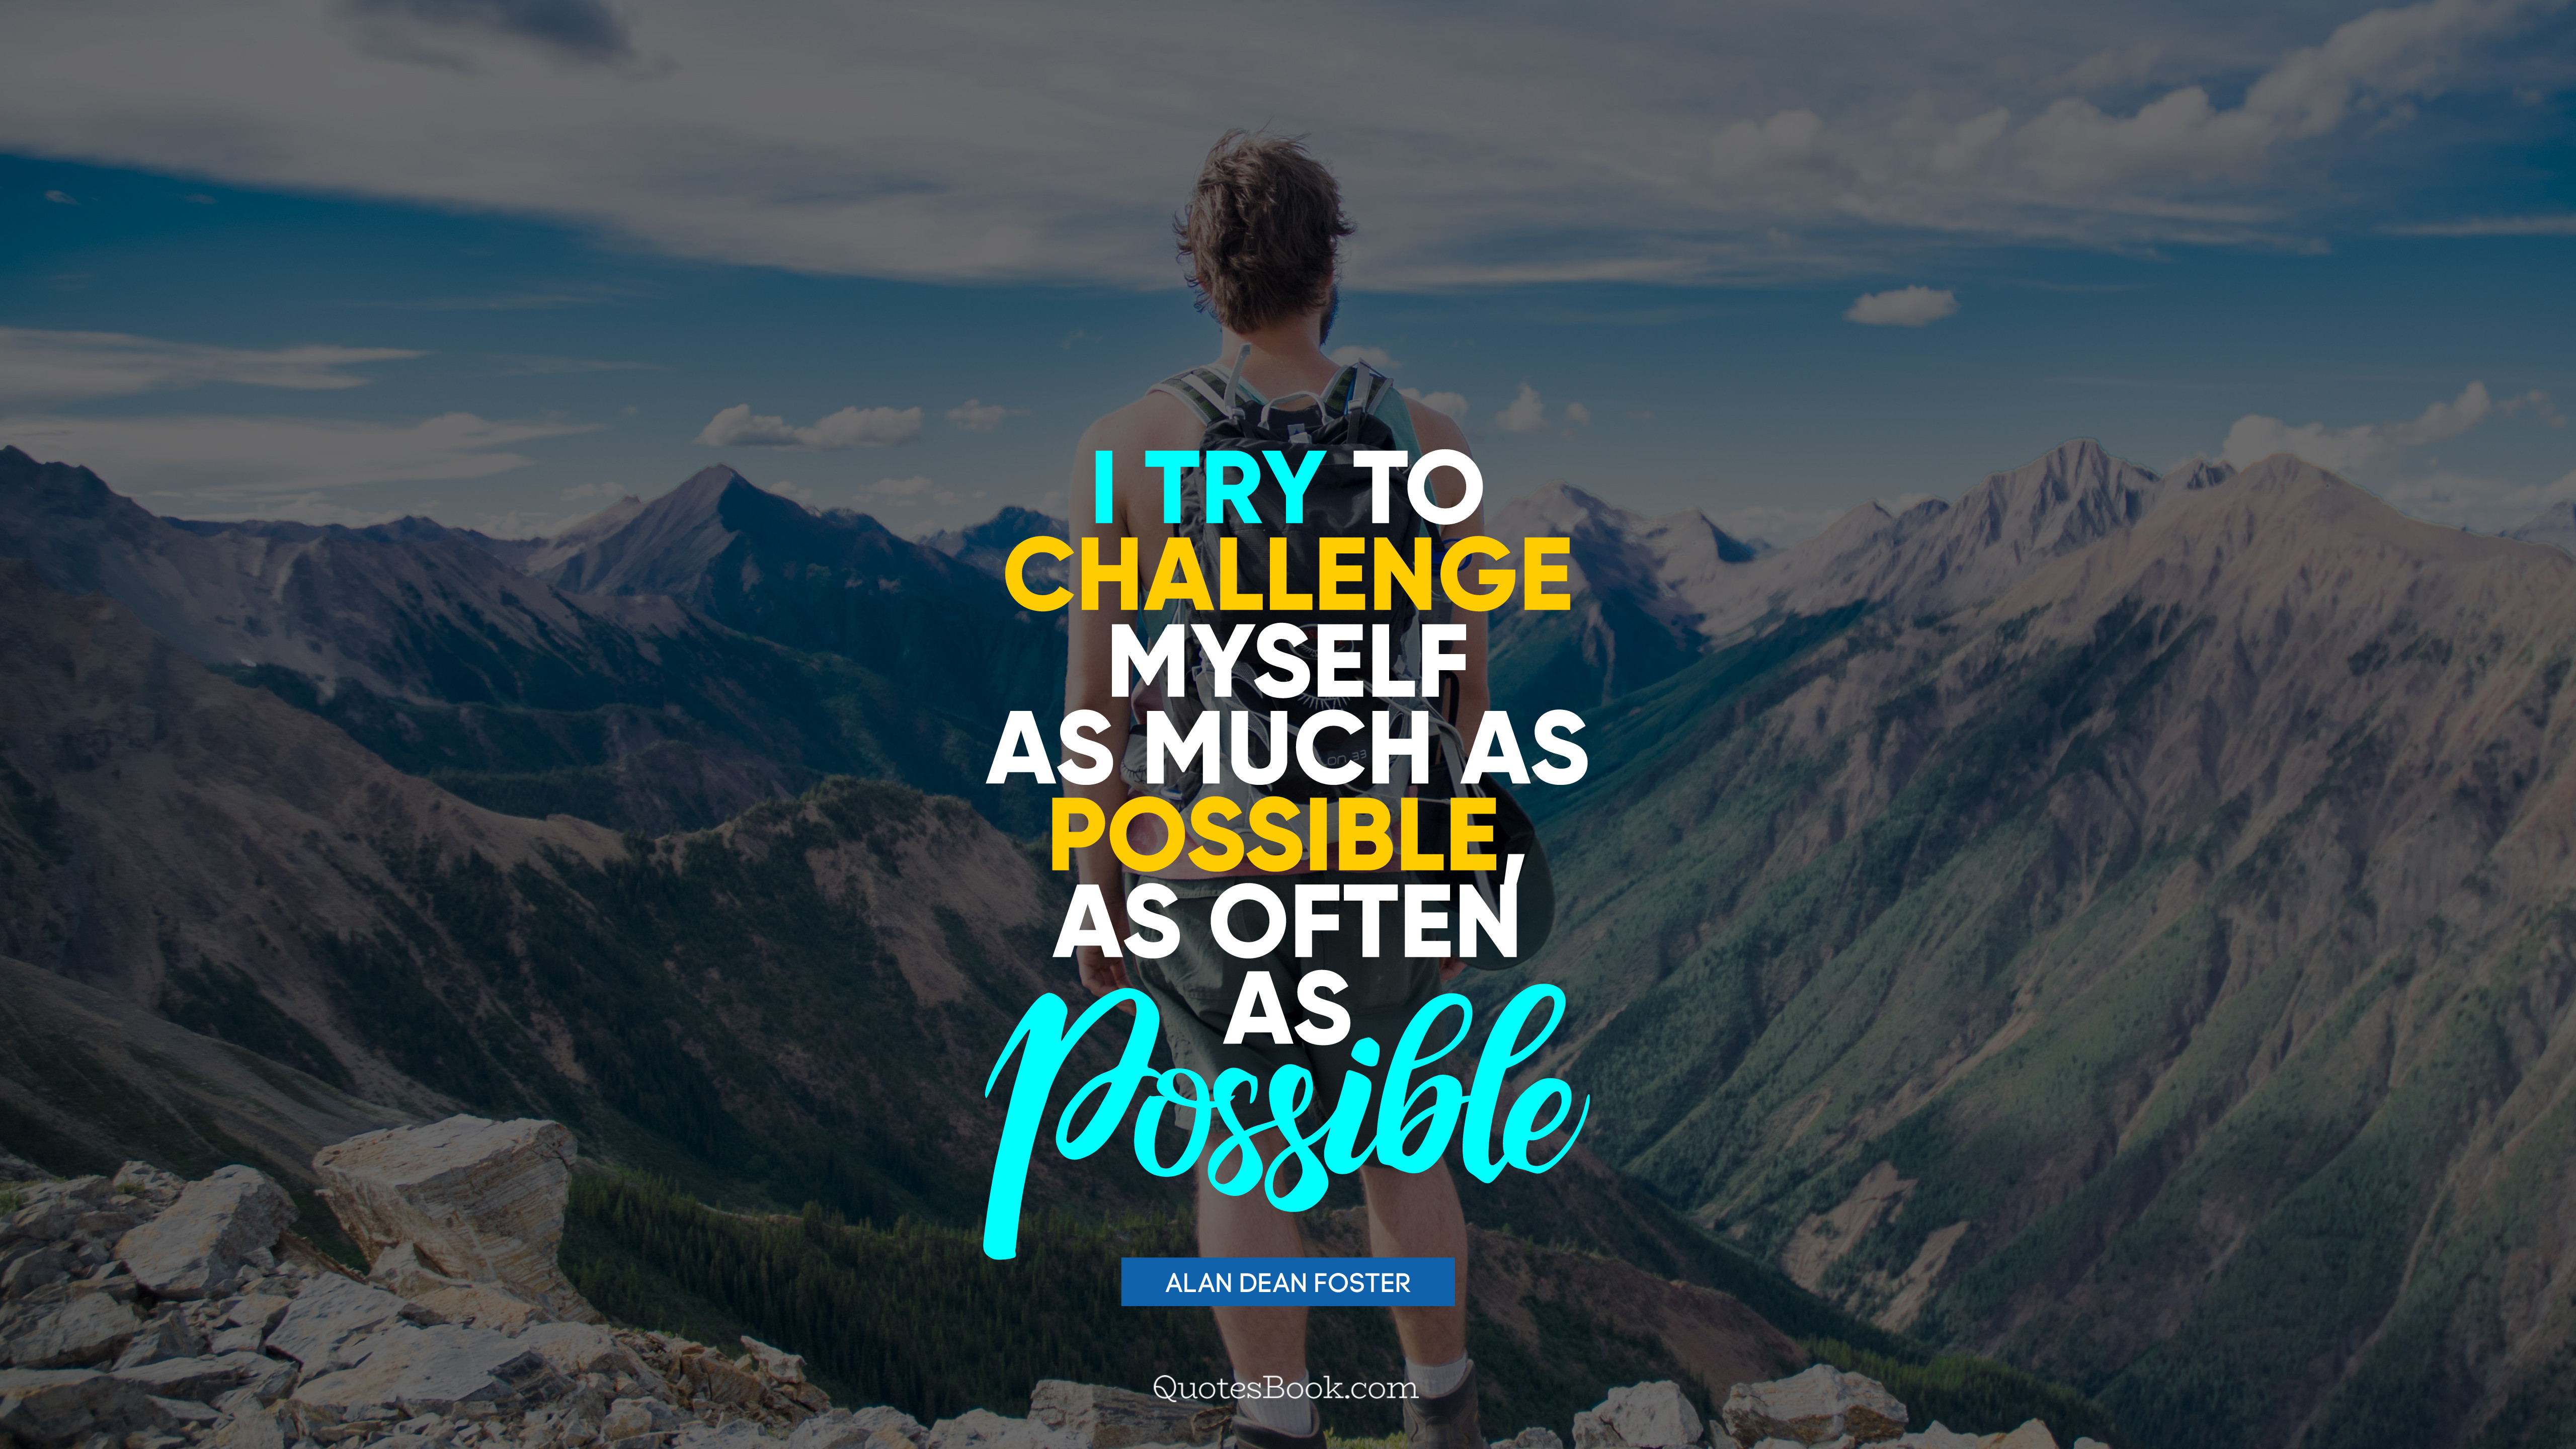 I try to challenge myself as much as possible, as often as possible ...